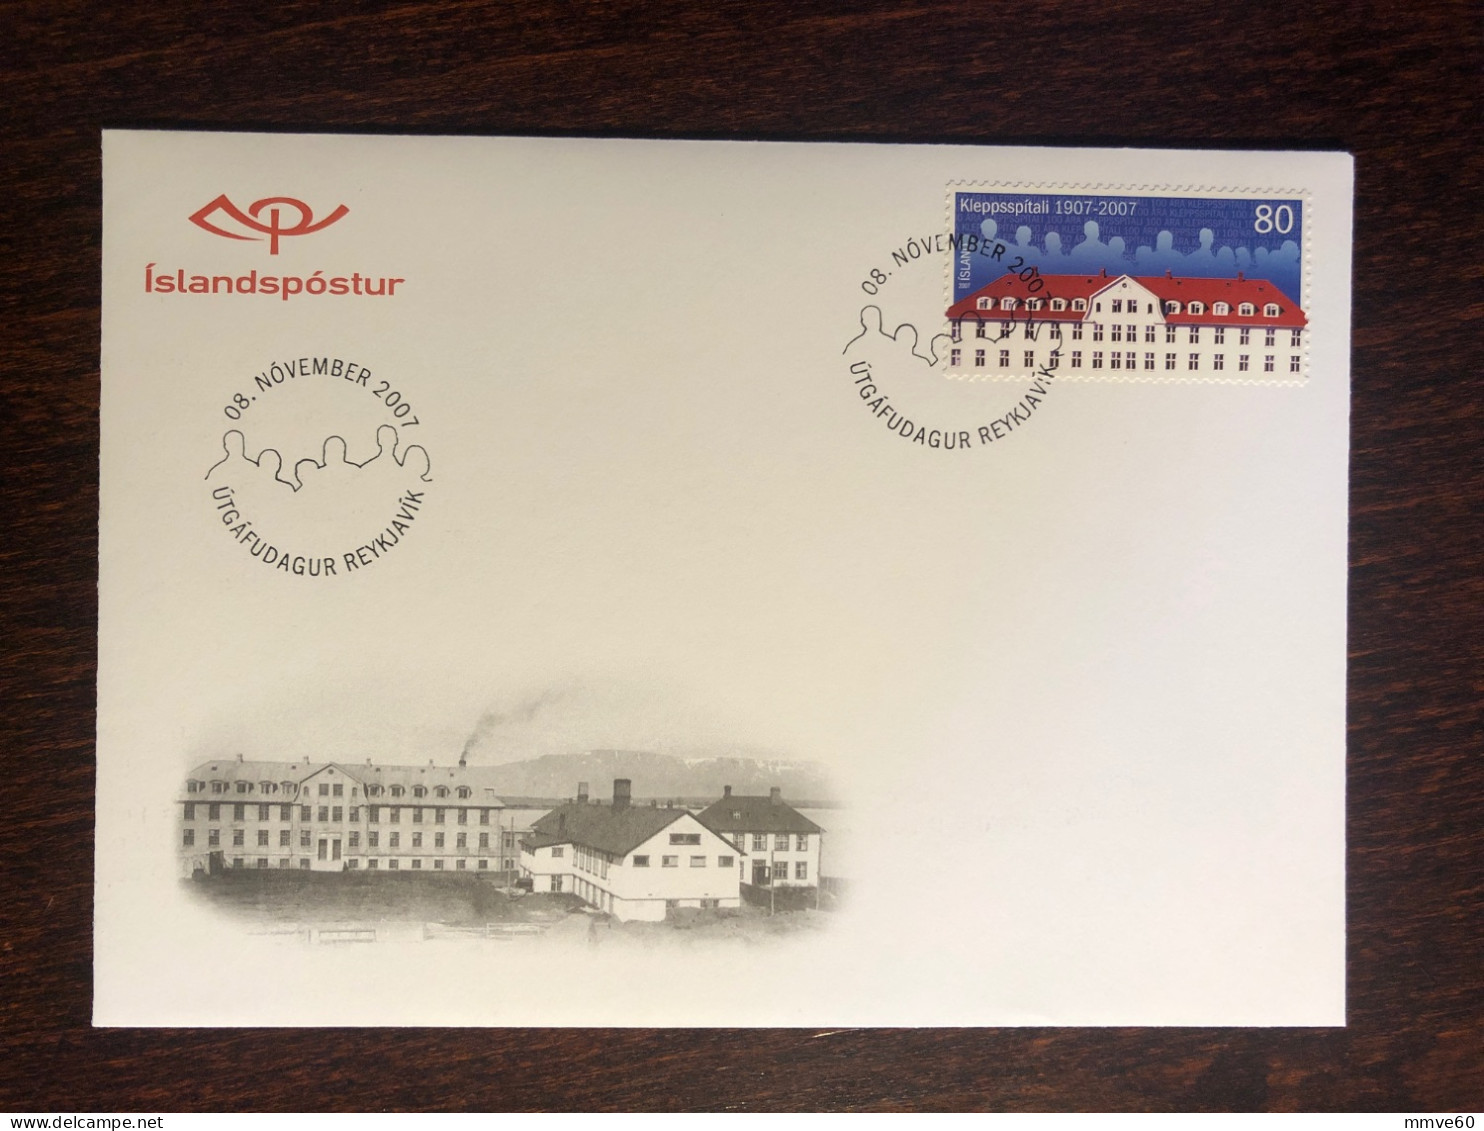 ICELAND FDC COVER 2007 YEAR PSYCHIATRY HOSPITAL MENTAL HEALTH MEDICINE STAMPS - FDC